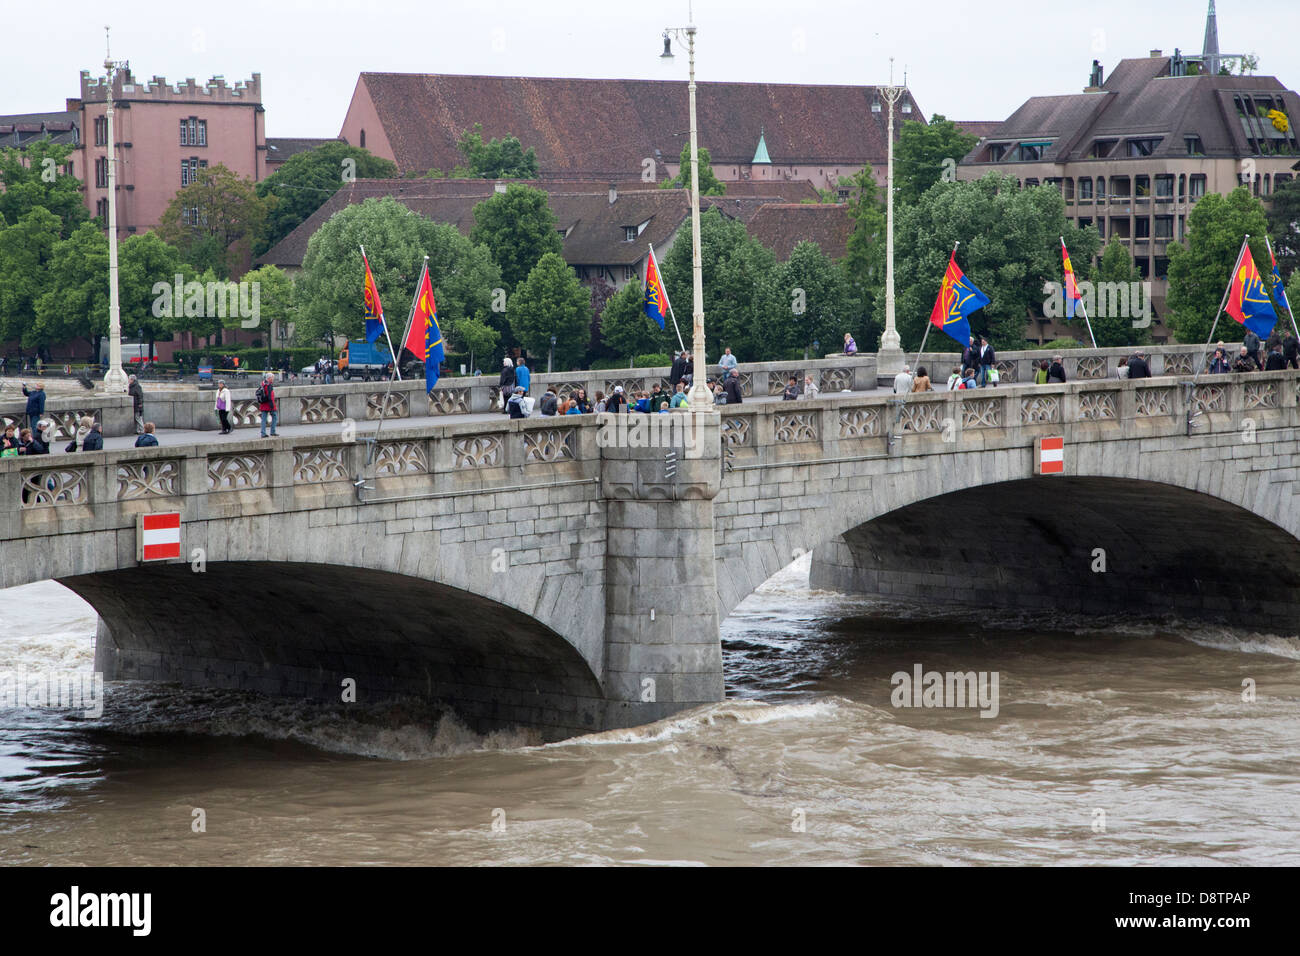 FC Basel flags on the Rhine river in Basel, Switzerland. The bridge is called the Mittlere Brücke, or Middle Bridge. Stock Photo